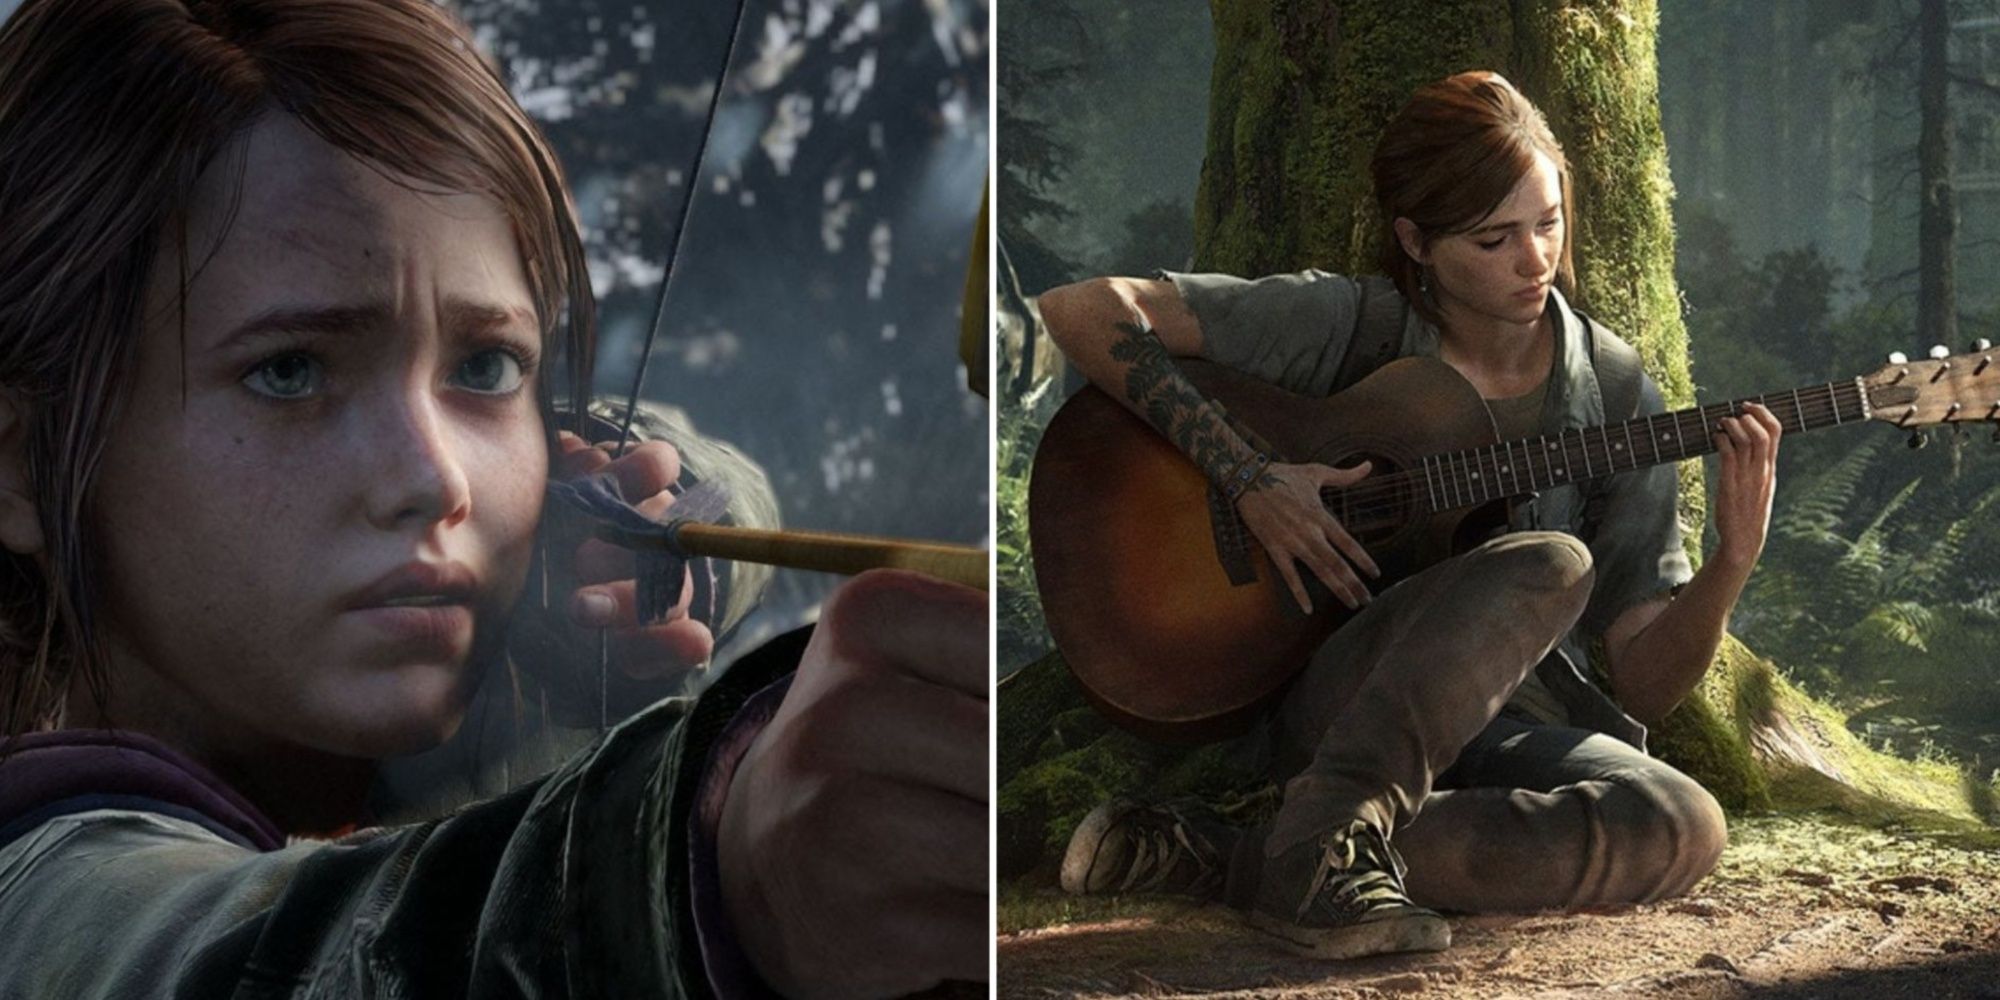 Ellie aiming a bow in the last of us and playing a guitar in the last of us 2